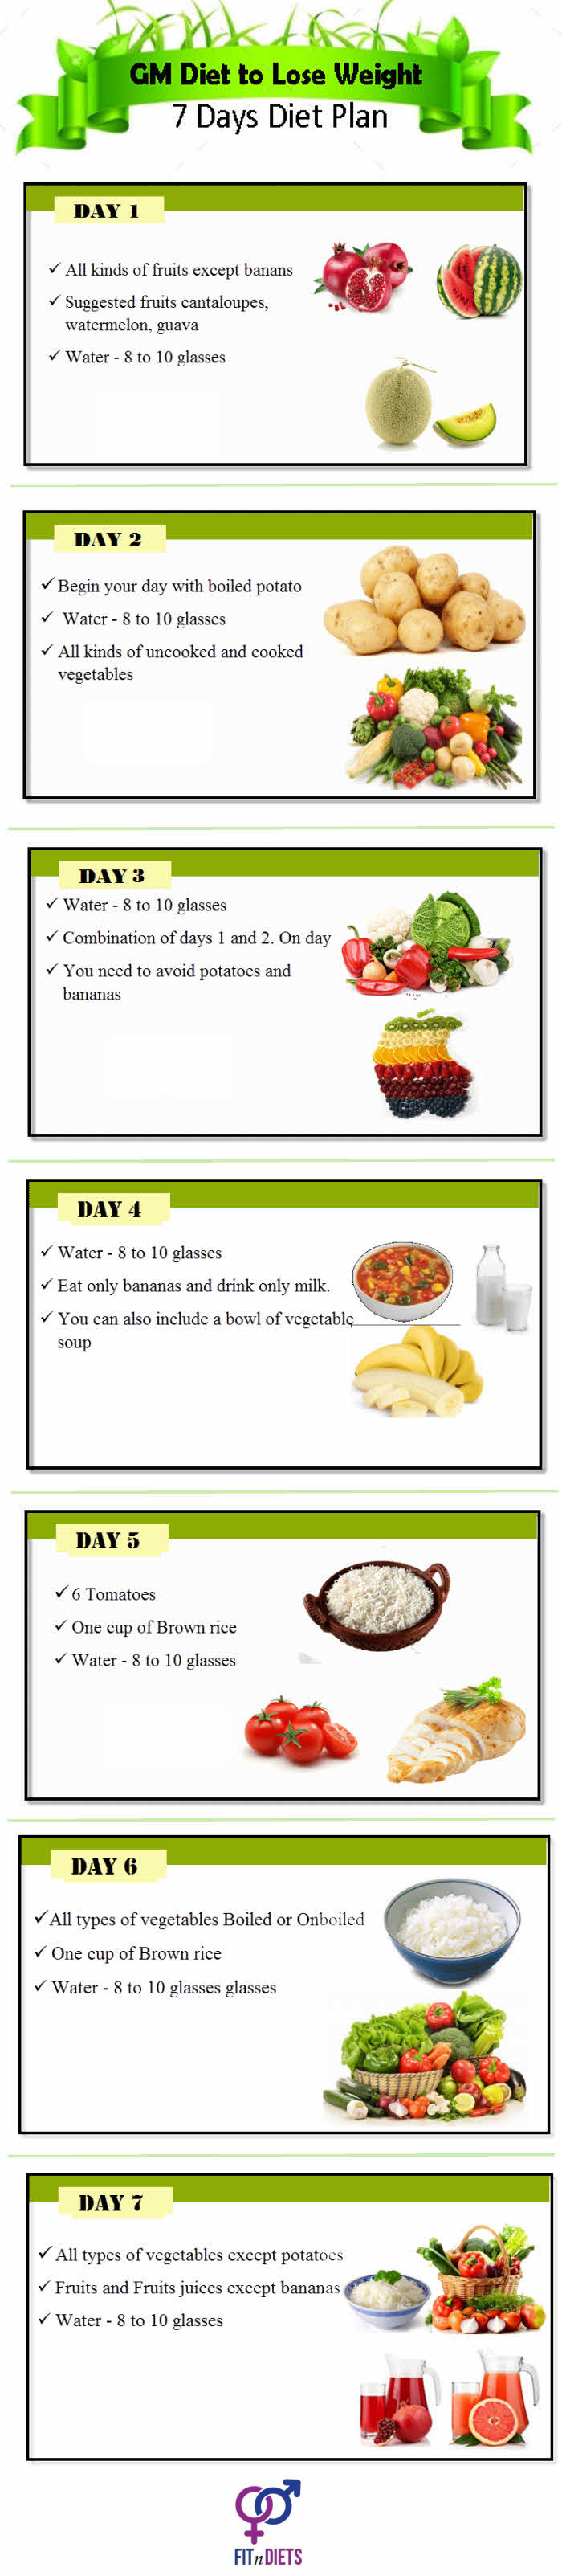 GM DIET 7days weight loss Infographic